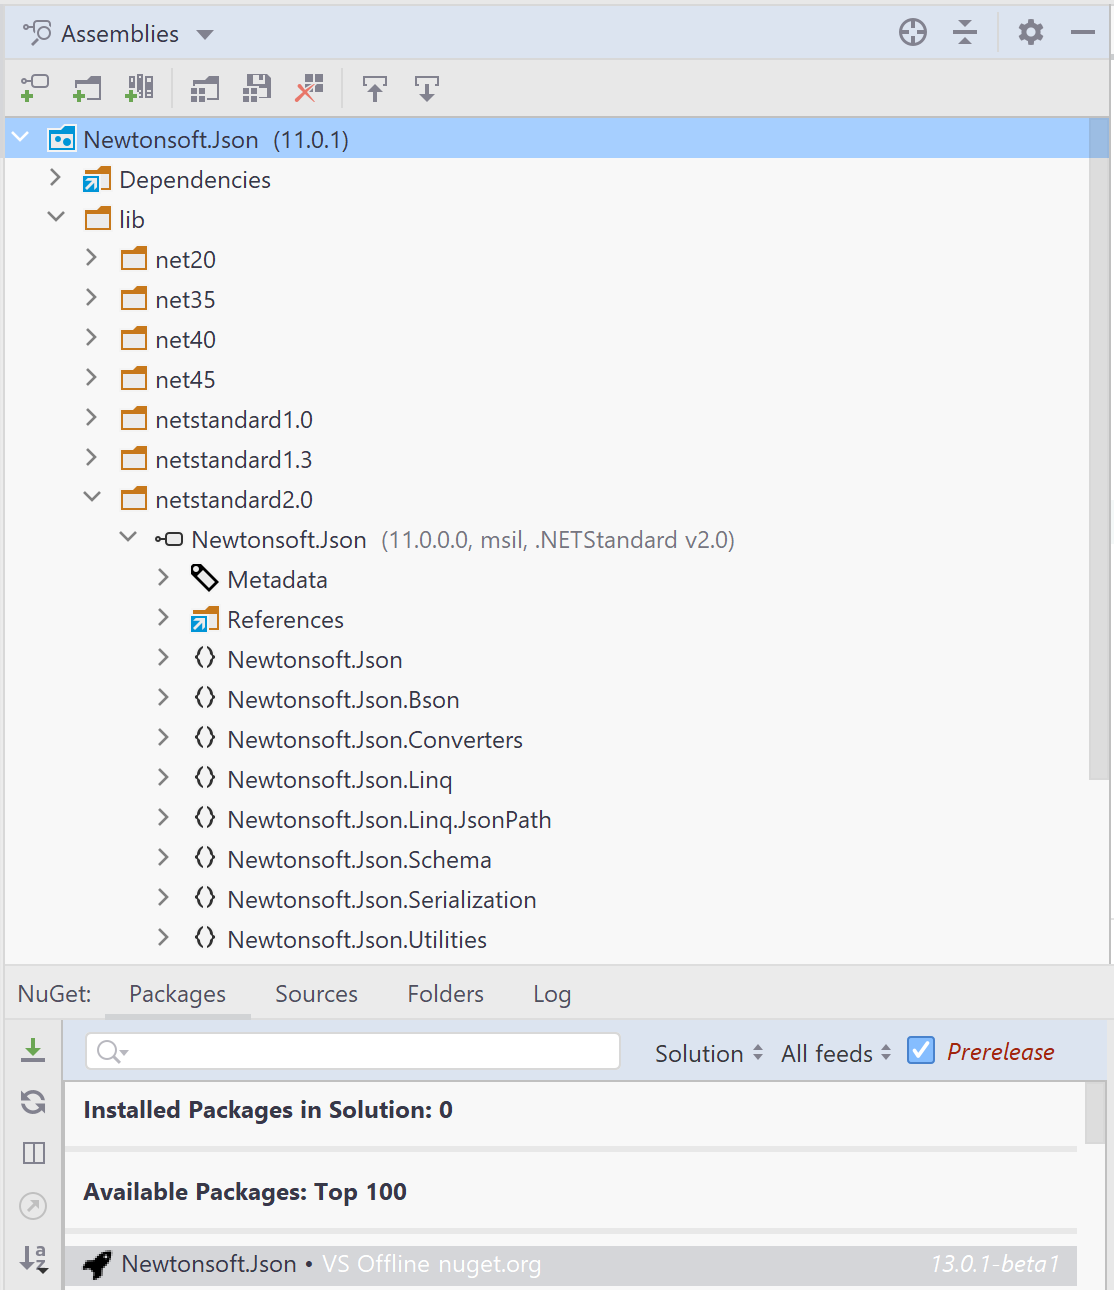 JetBrains Rider's Assembly Explorer with NuGet Package